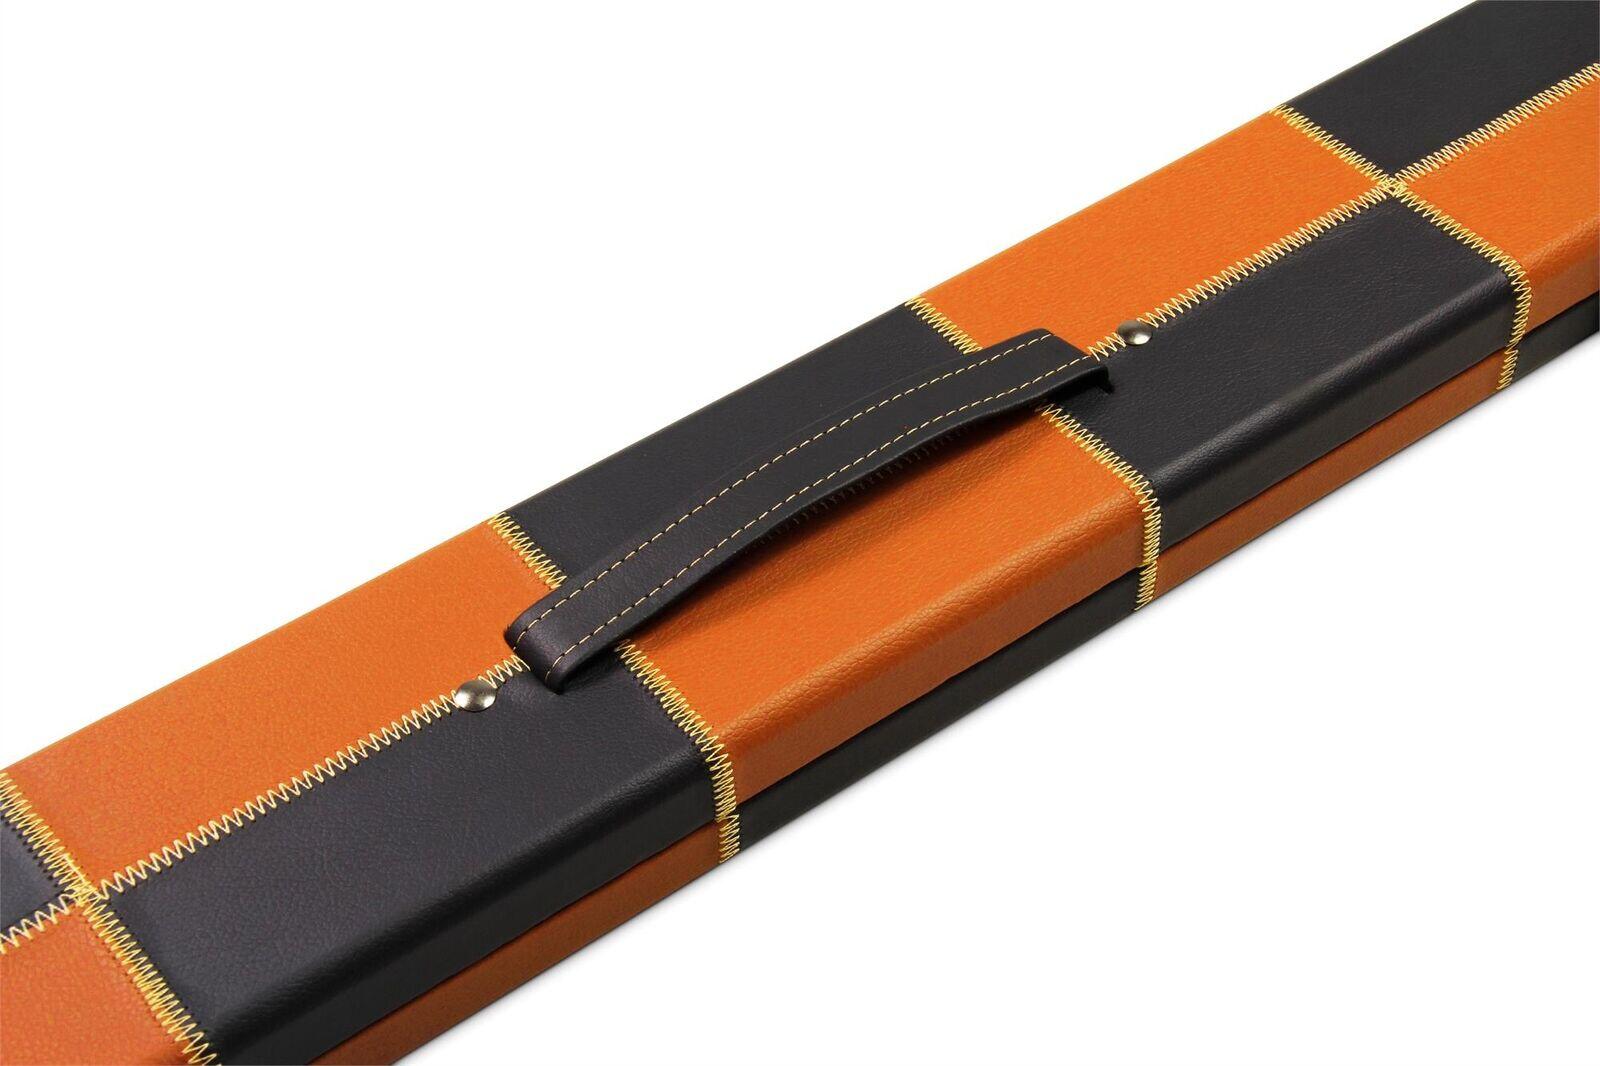 Deluxe 1 Piece WIDE ORANGE CHEQUERED Snooker Pool Cue Case - Holds 3 Cues 3/7